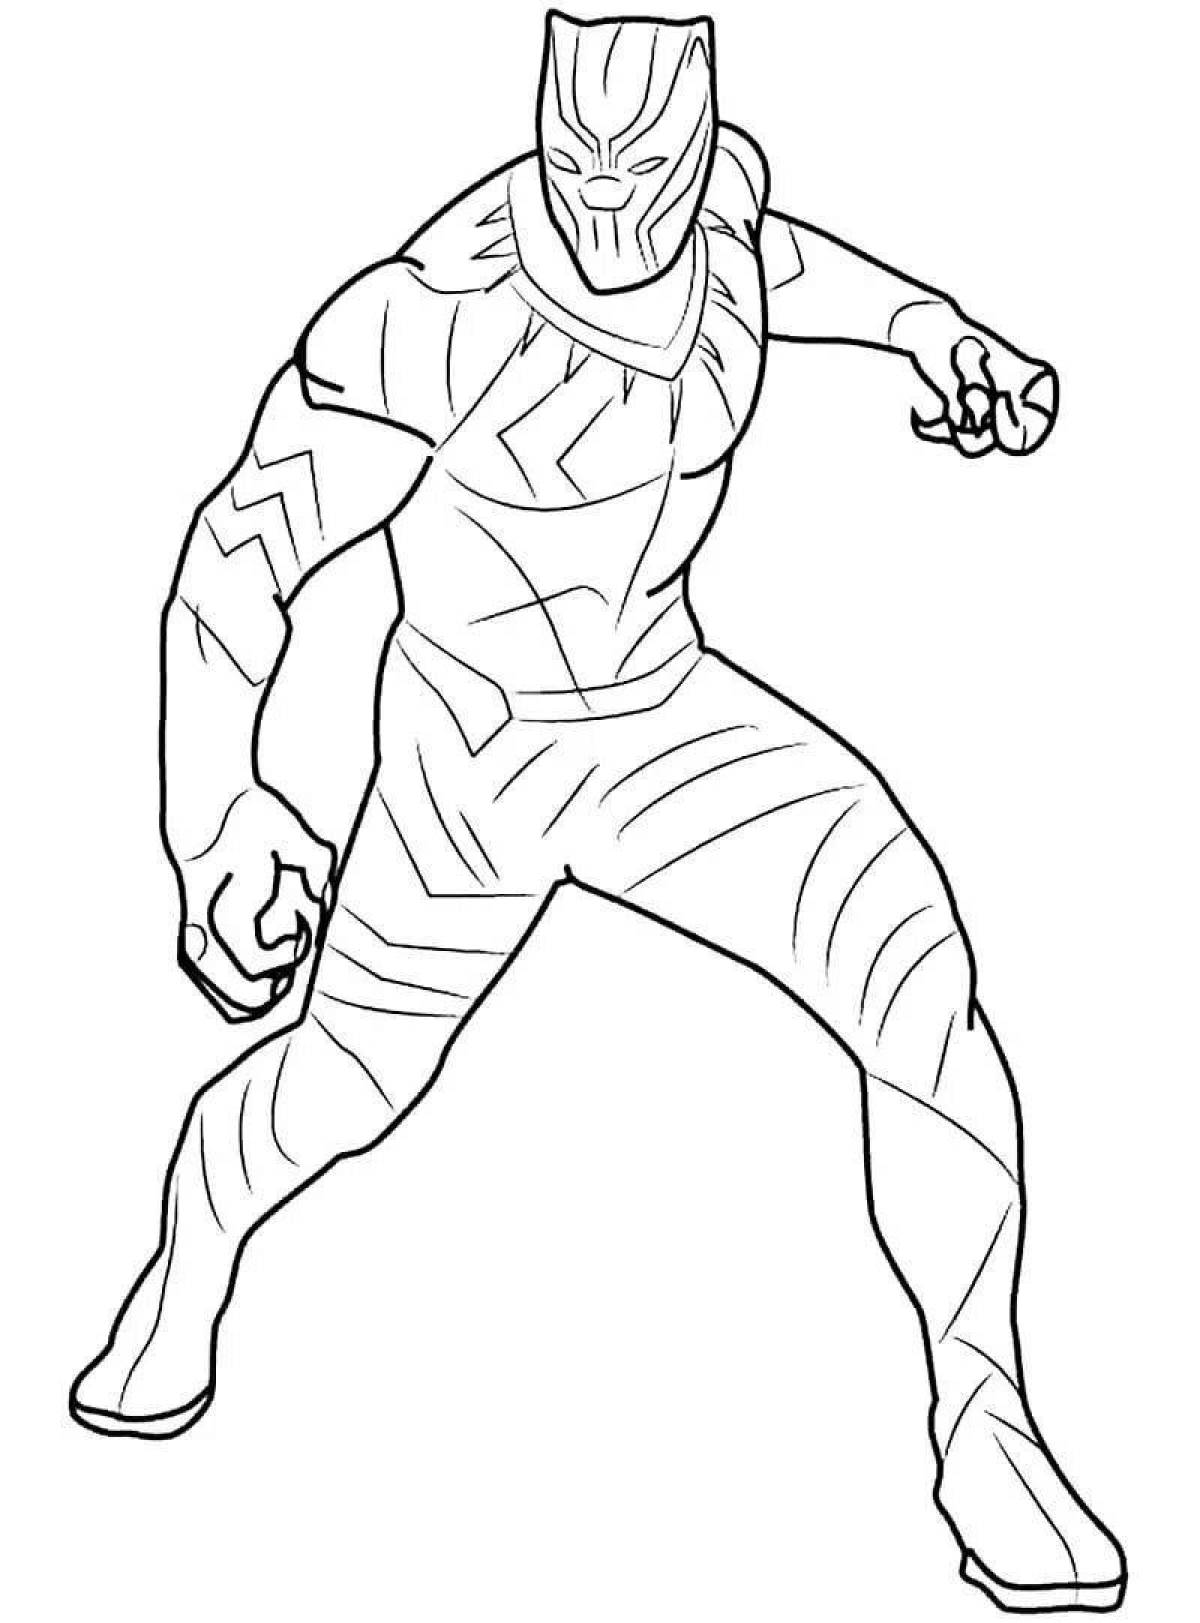 Marvel panther coloring page